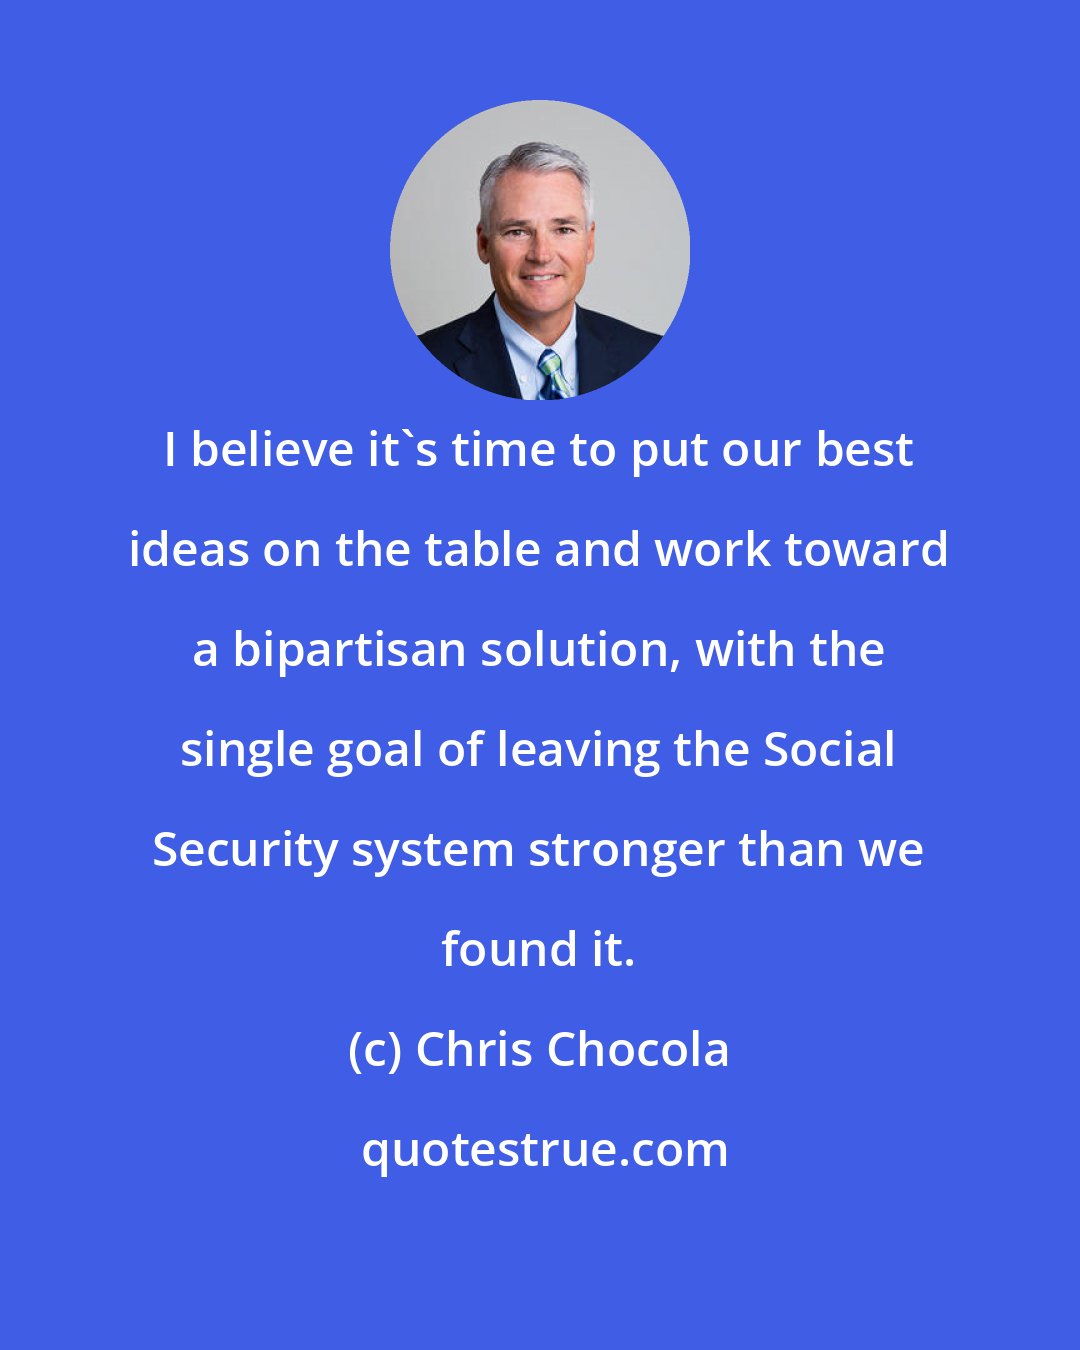 Chris Chocola: I believe it's time to put our best ideas on the table and work toward a bipartisan solution, with the single goal of leaving the Social Security system stronger than we found it.